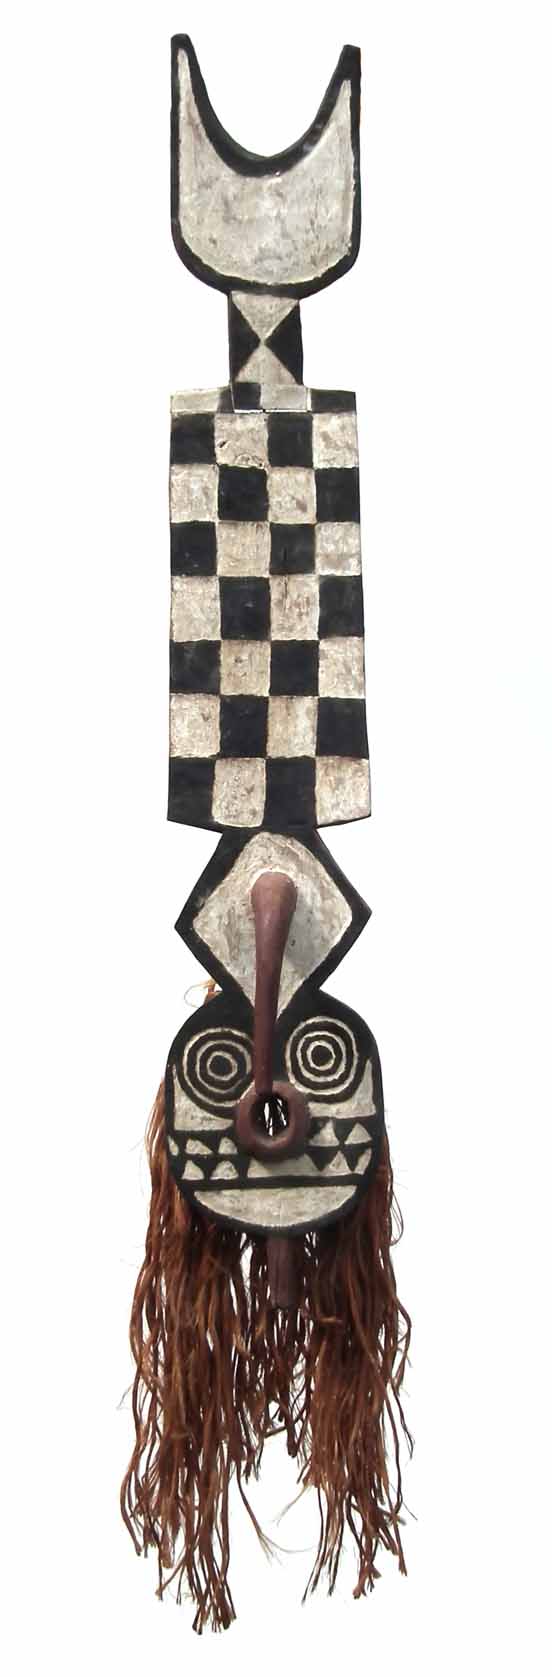 Bobo Bwa plank mask fron Hounde area of Burkina Faso, wood, pigment and fibres, 147cm high excluding